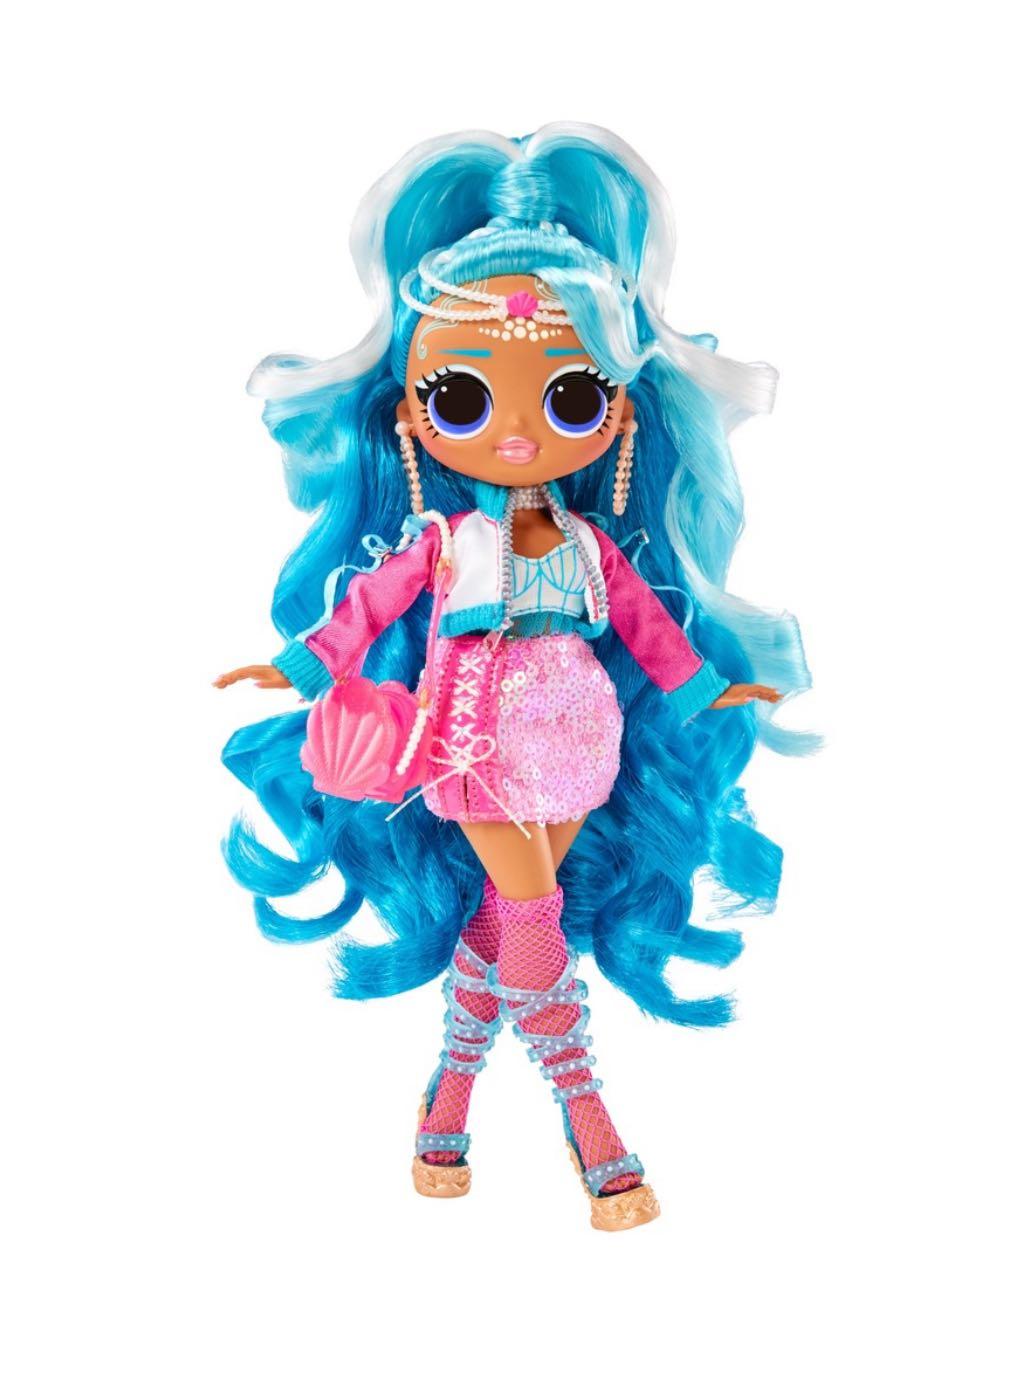 LOL Surprise OMG Queens Splash Beauty fashion doll with 125+ Mix